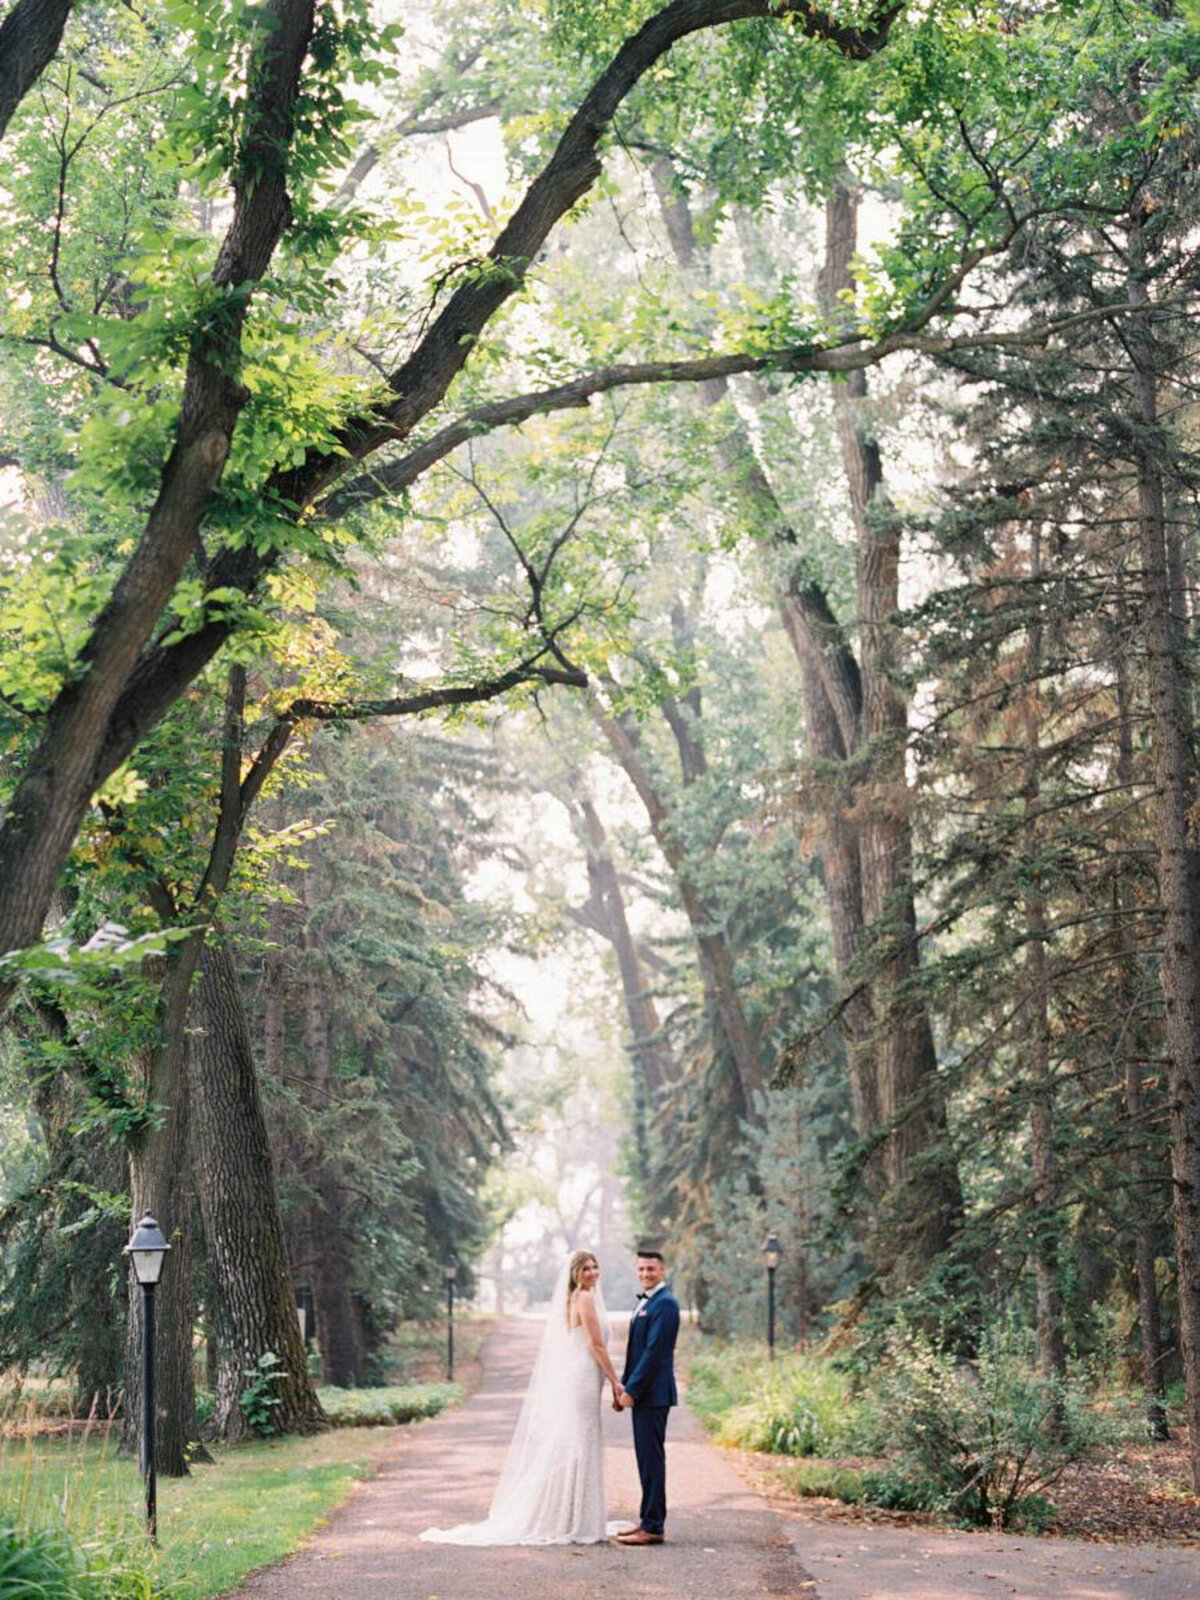 Bride and groom on the tree-lined path at The Norland Historic Estate, a classic vintage wedding venue in Lethbridge, AB, featured on the Brontë Bride Vendor Guide.